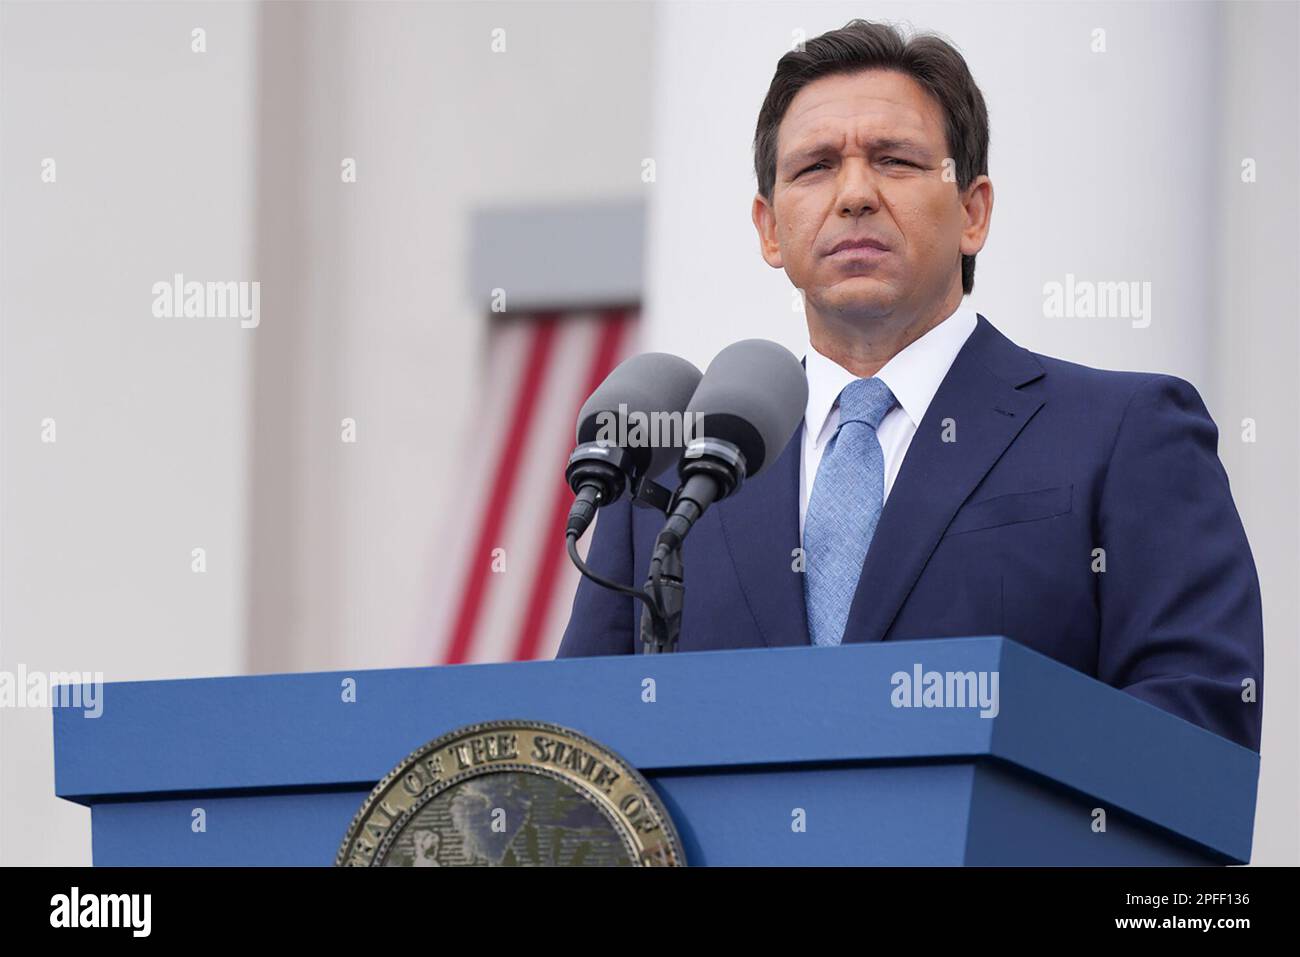 Florida Governor Ron DeSantis speaking from the steps of the Old Capitol after being sworn in to begin his second term during an inauguration ceremony on January 3, 2023, in Tallahassee, Florida. (USA) Stock Photo